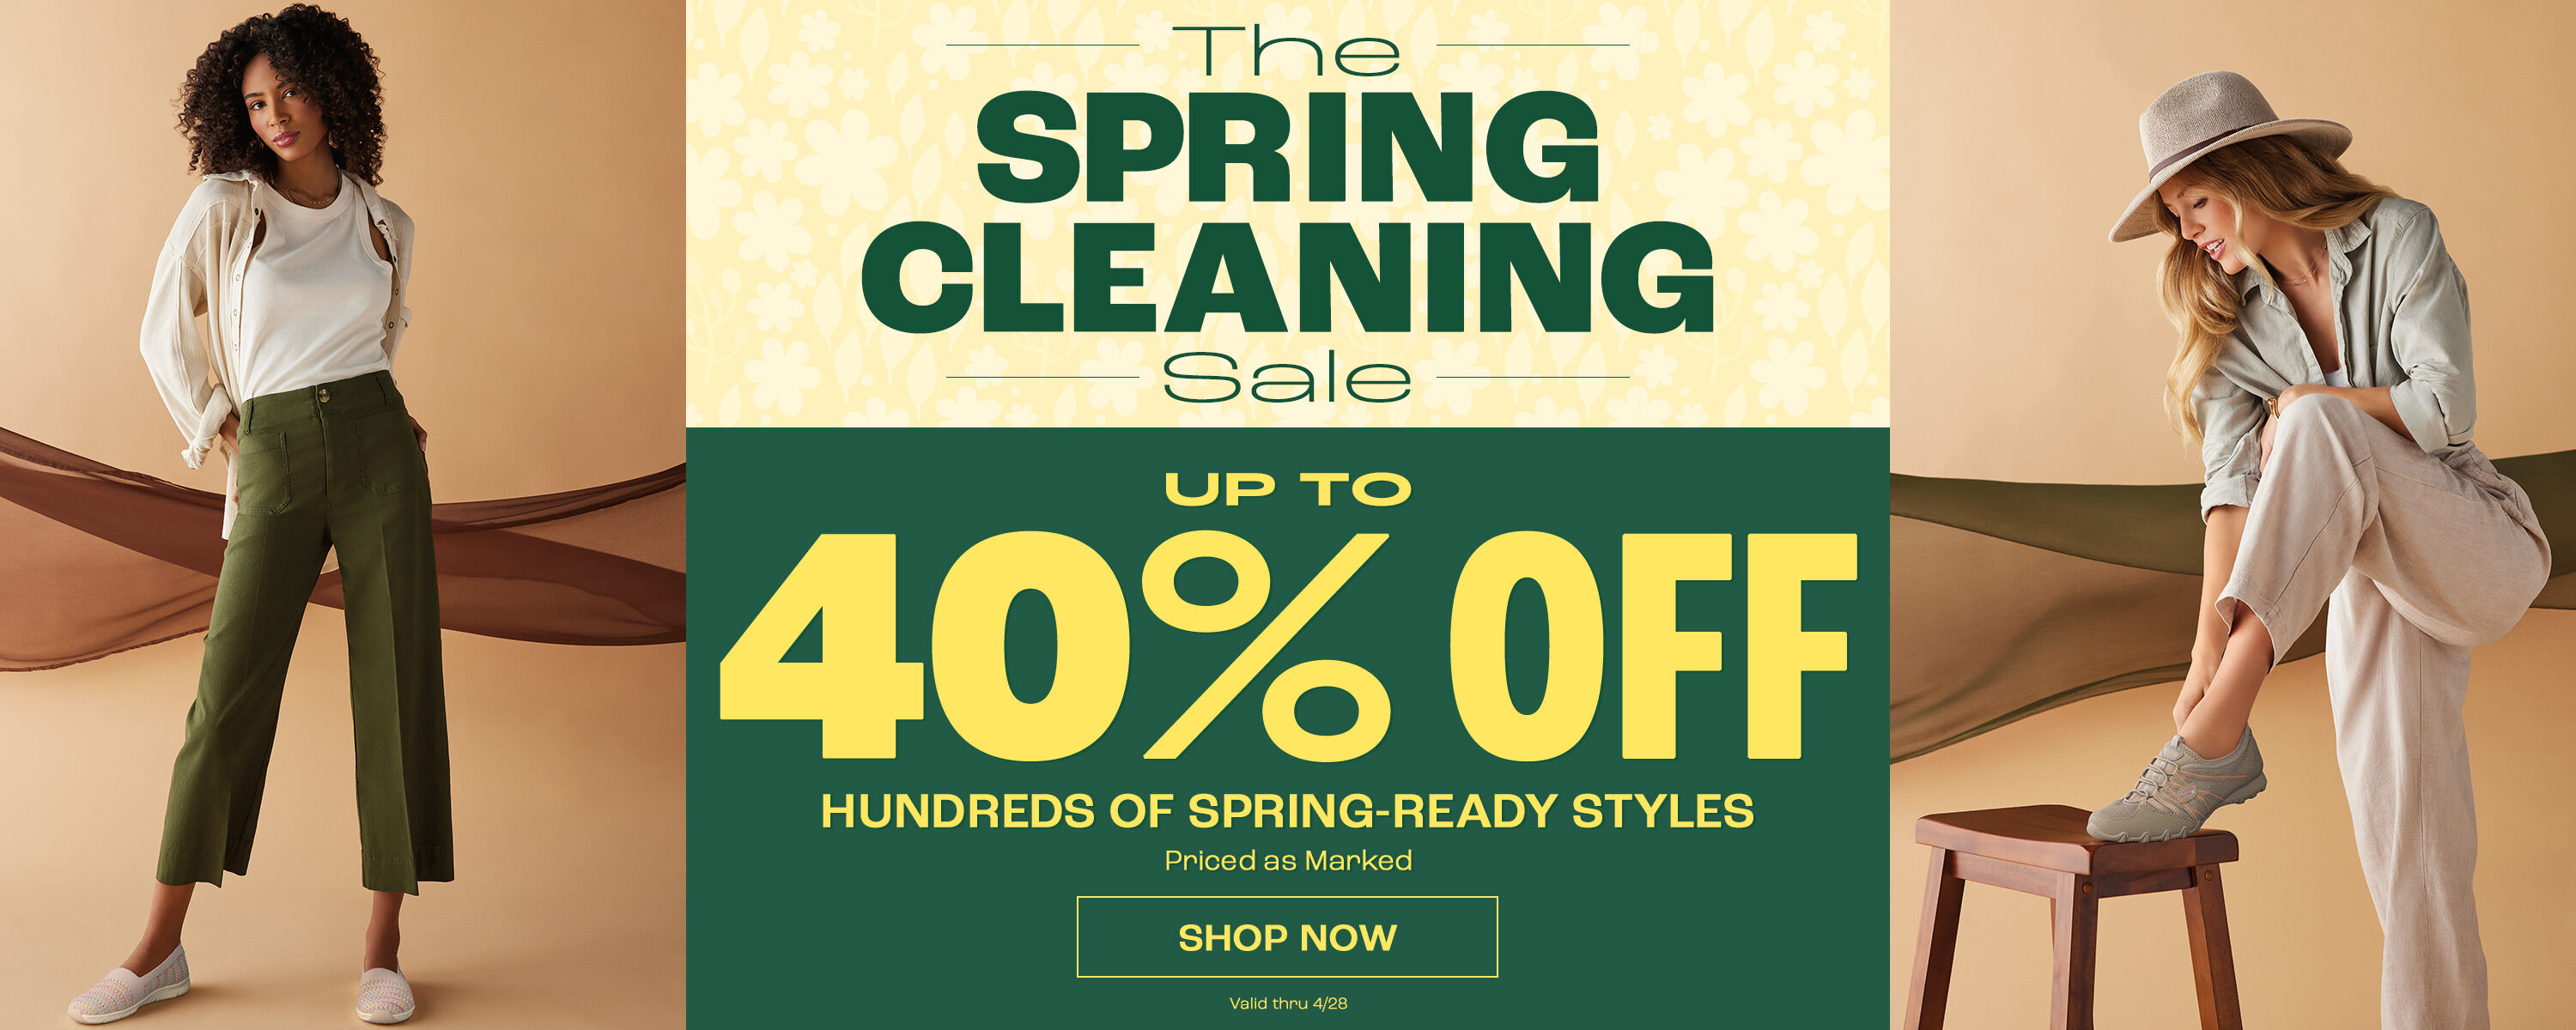 Spring Cleaning Sale ~ Up to 40% off - SHOP NOW